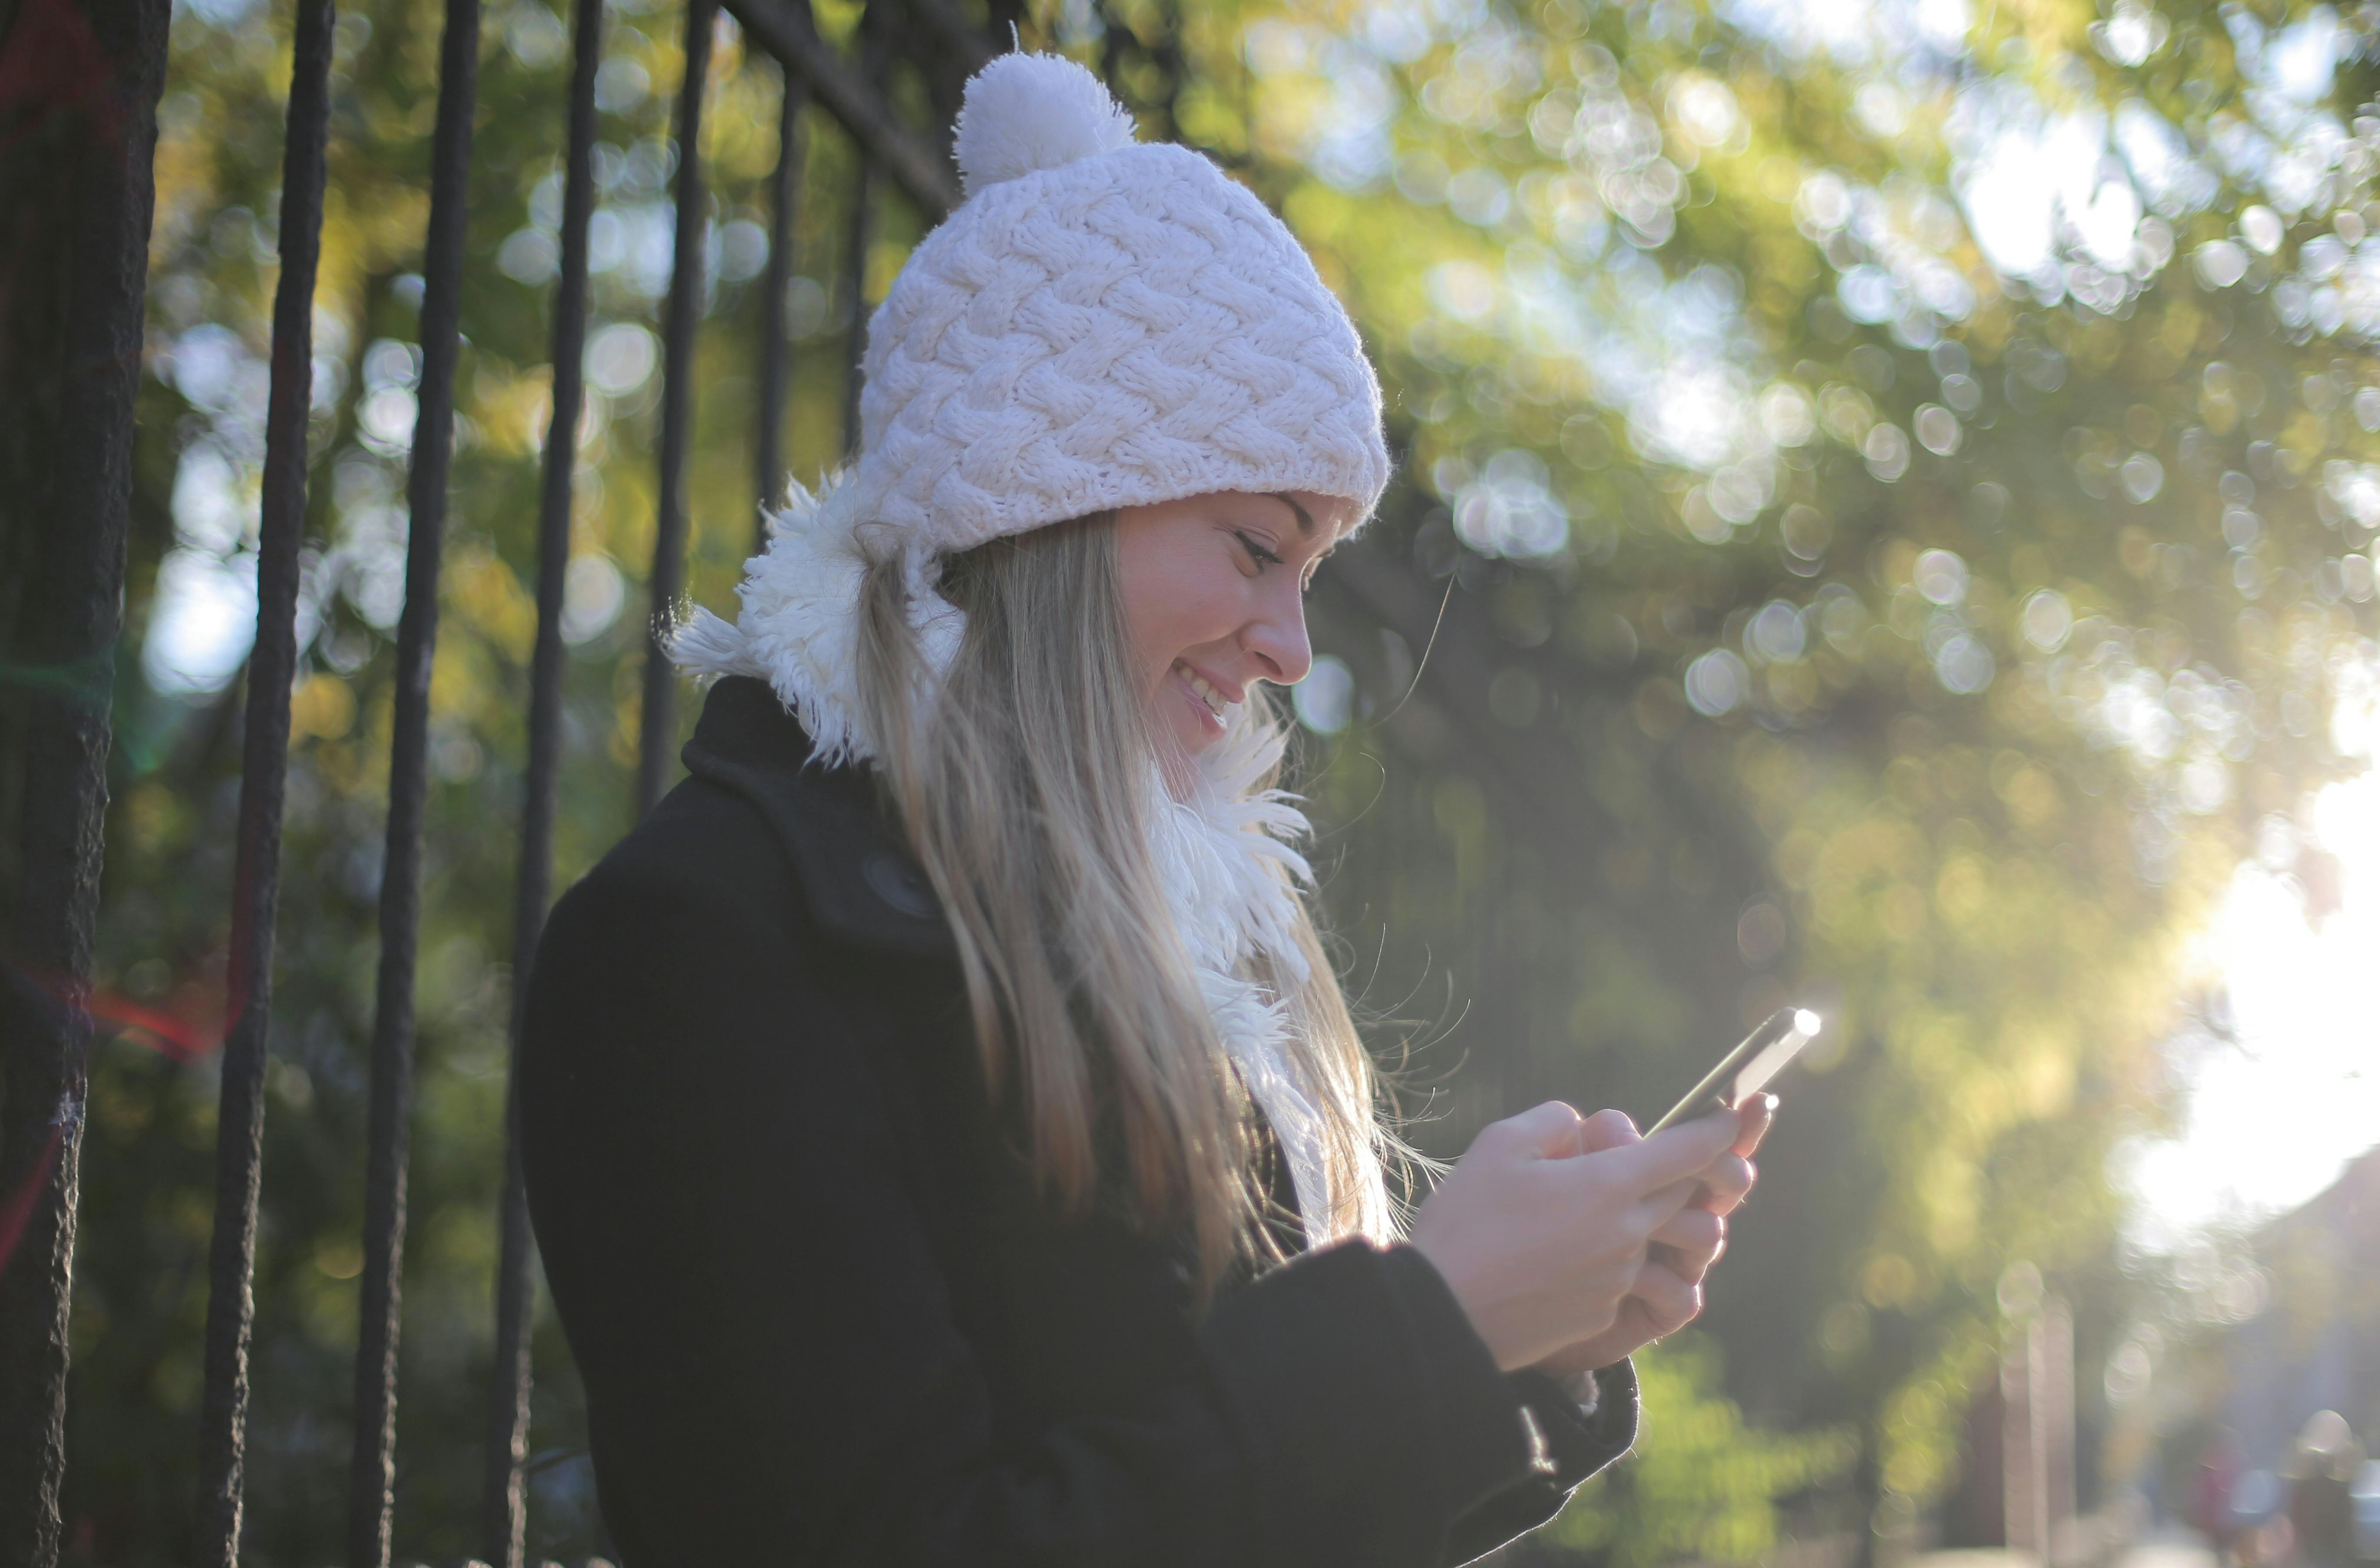 A woman smiling while looking at her phone | Source: Pexels